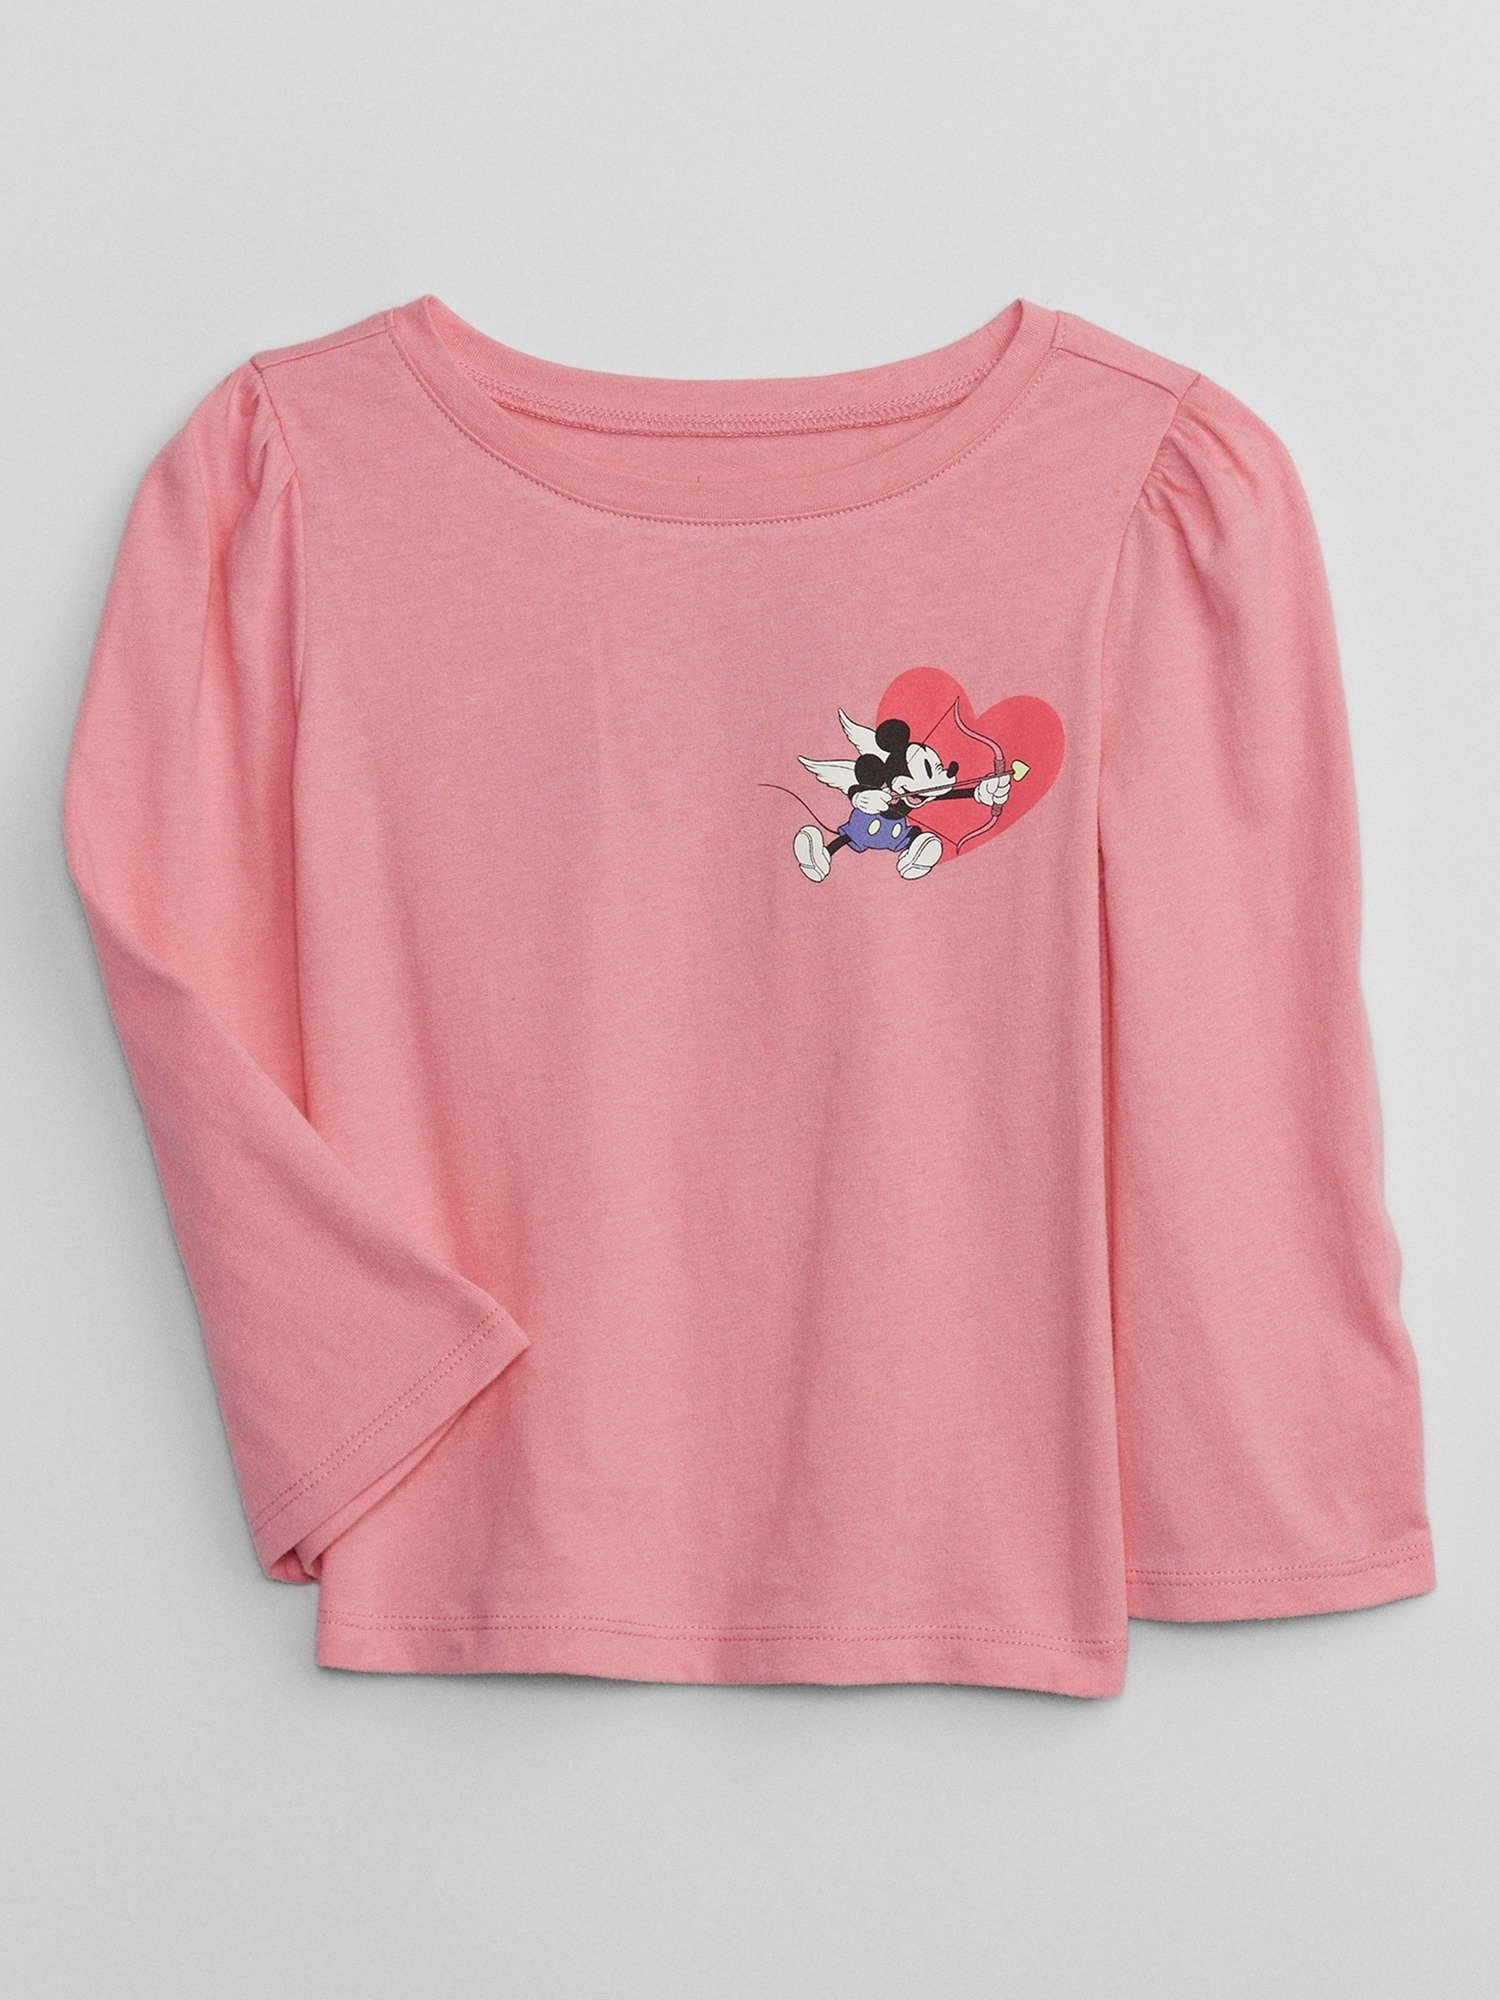 Disney Mickey Mouse and Minnie Mouse Grafikli T-Shirt product image